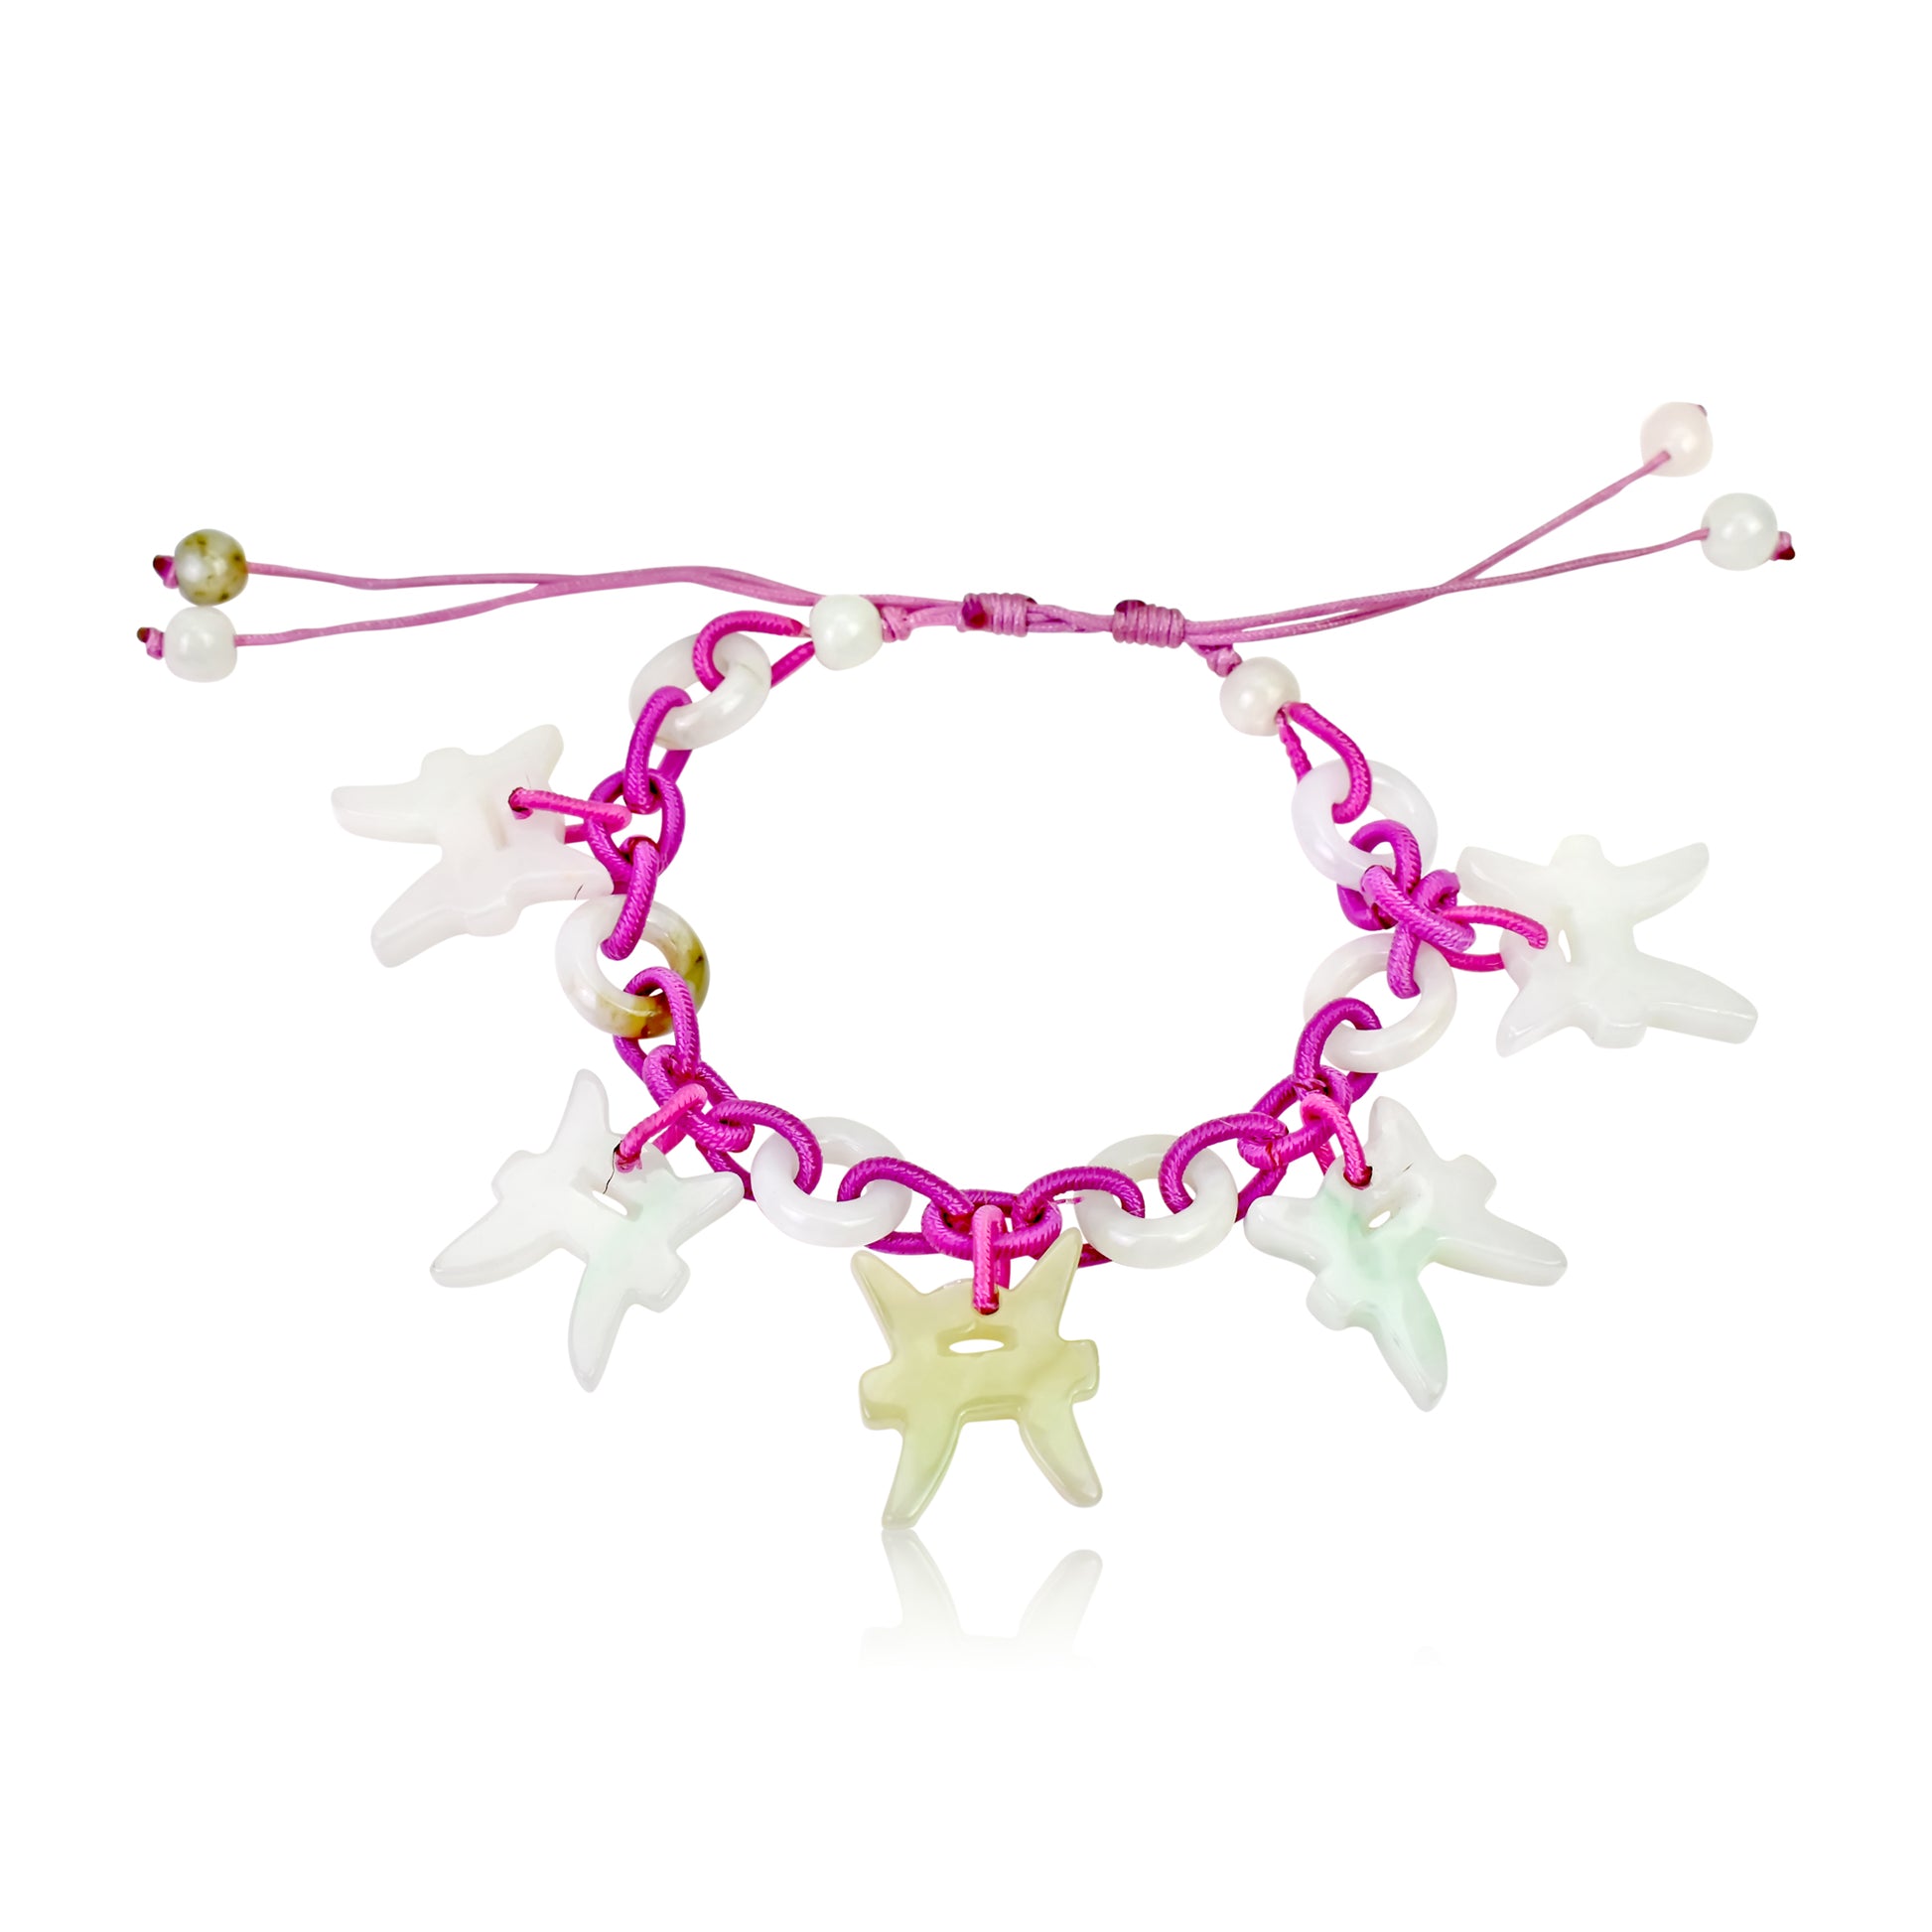 Discover the Magic of the Pisces with Our Adjustable Charm Bracelet made with Lavender Cord